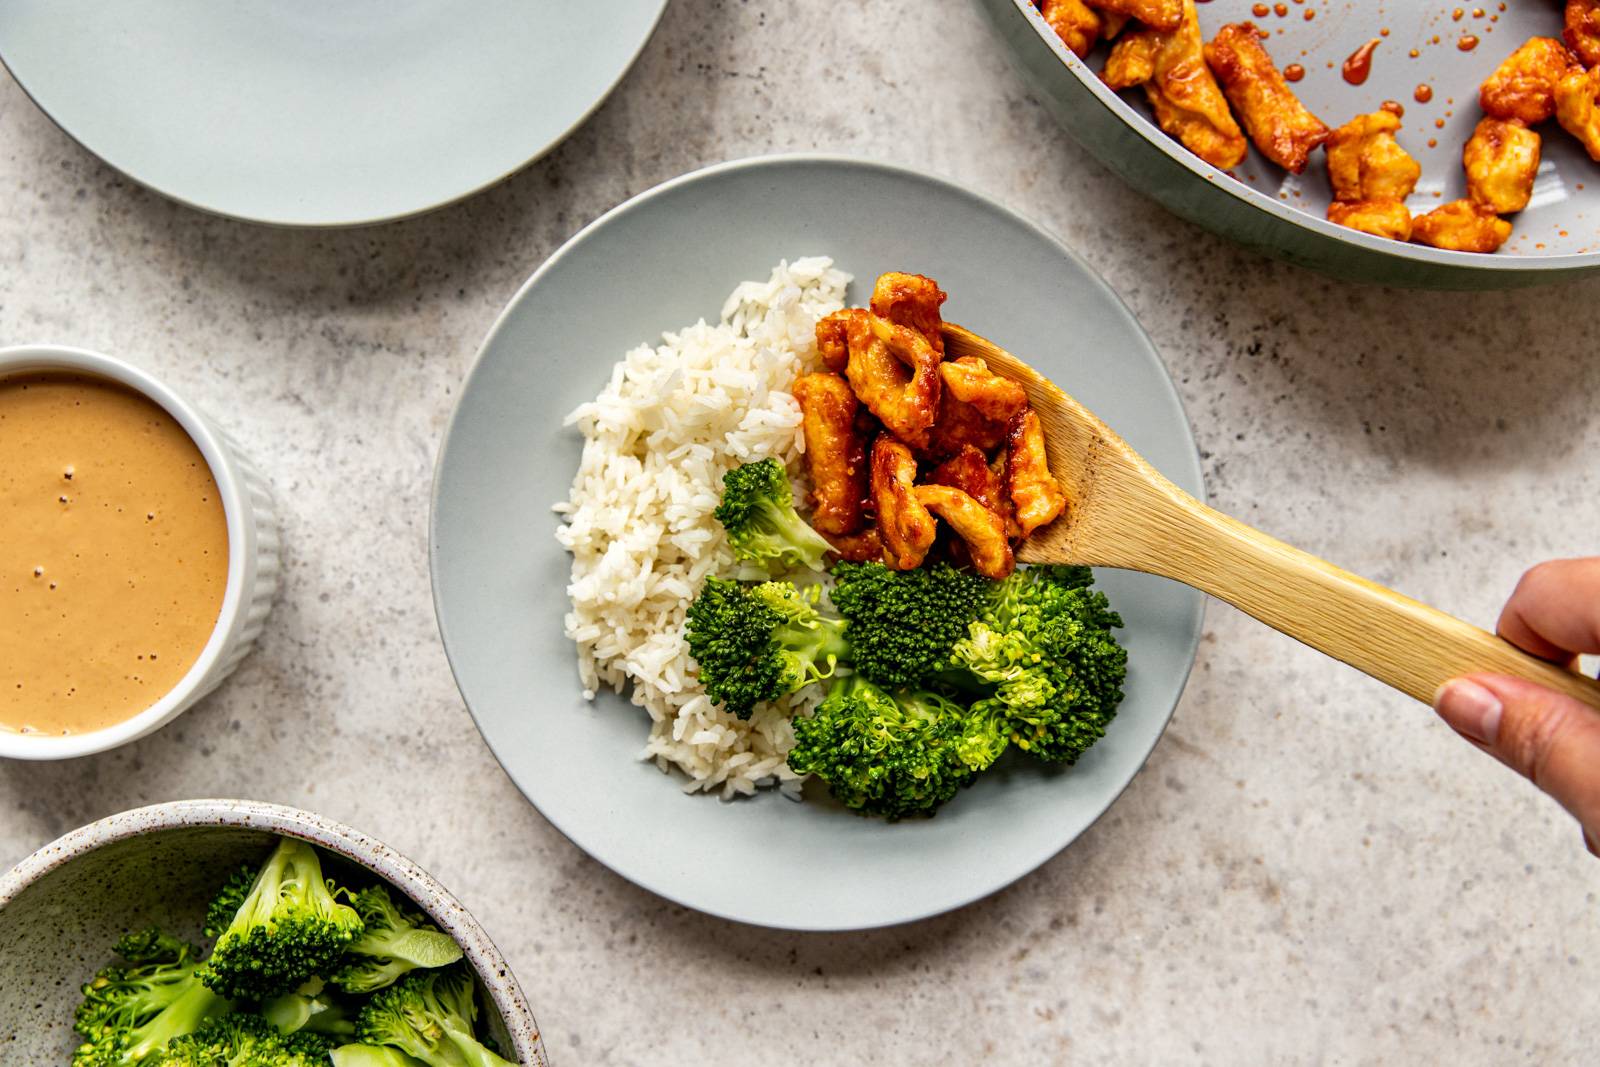 Red curry chicken gets added to a plate with broccoli and cooked rice